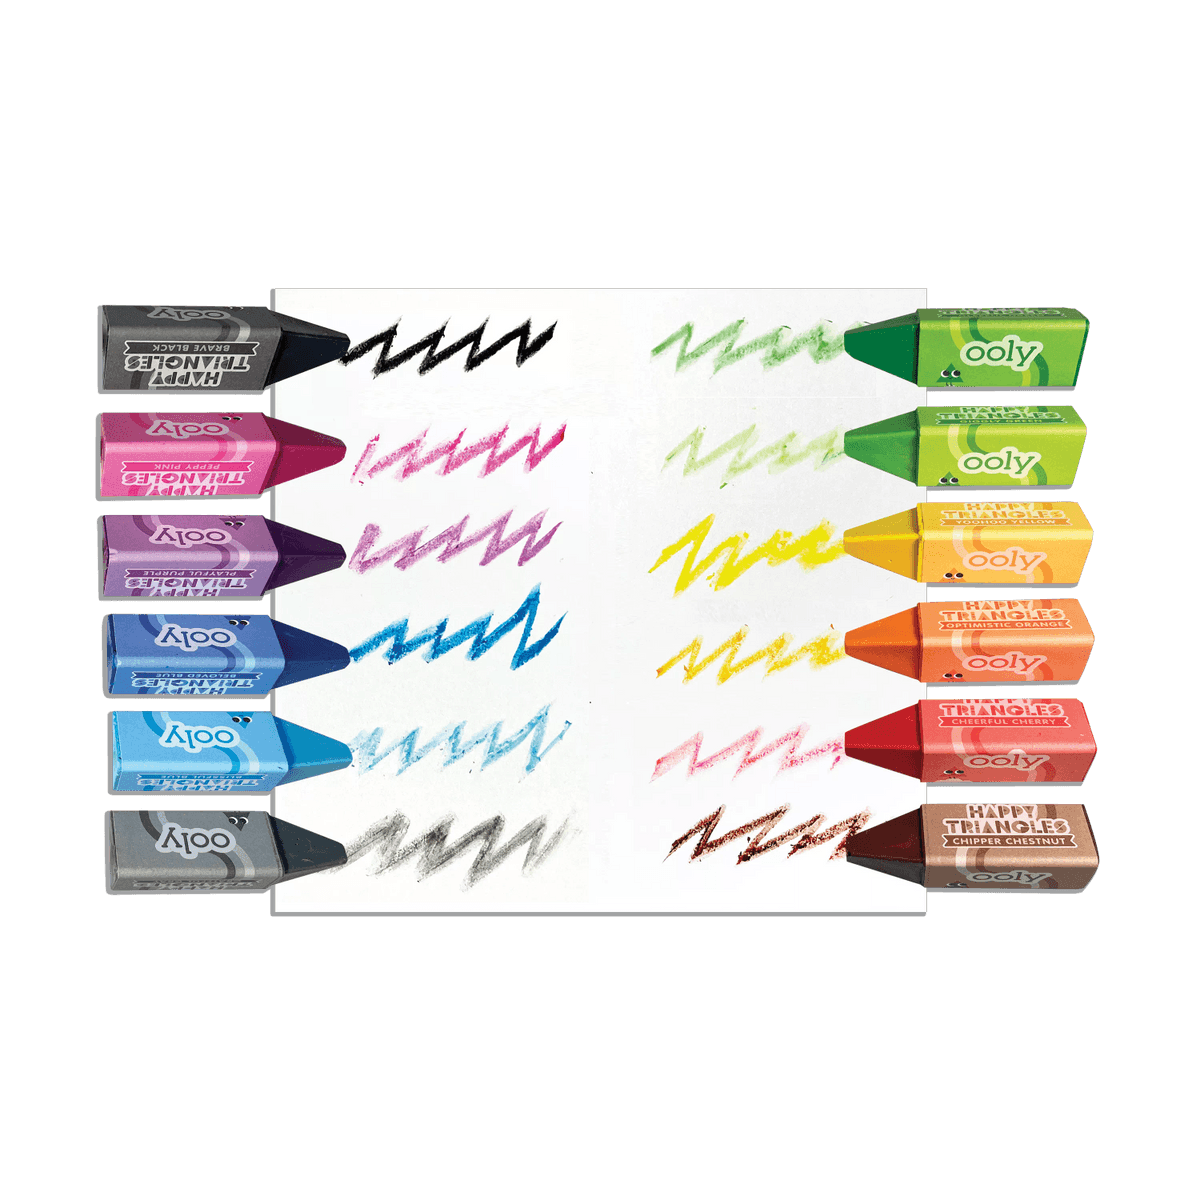 Happy Triangles jumbo crayons with color swatches